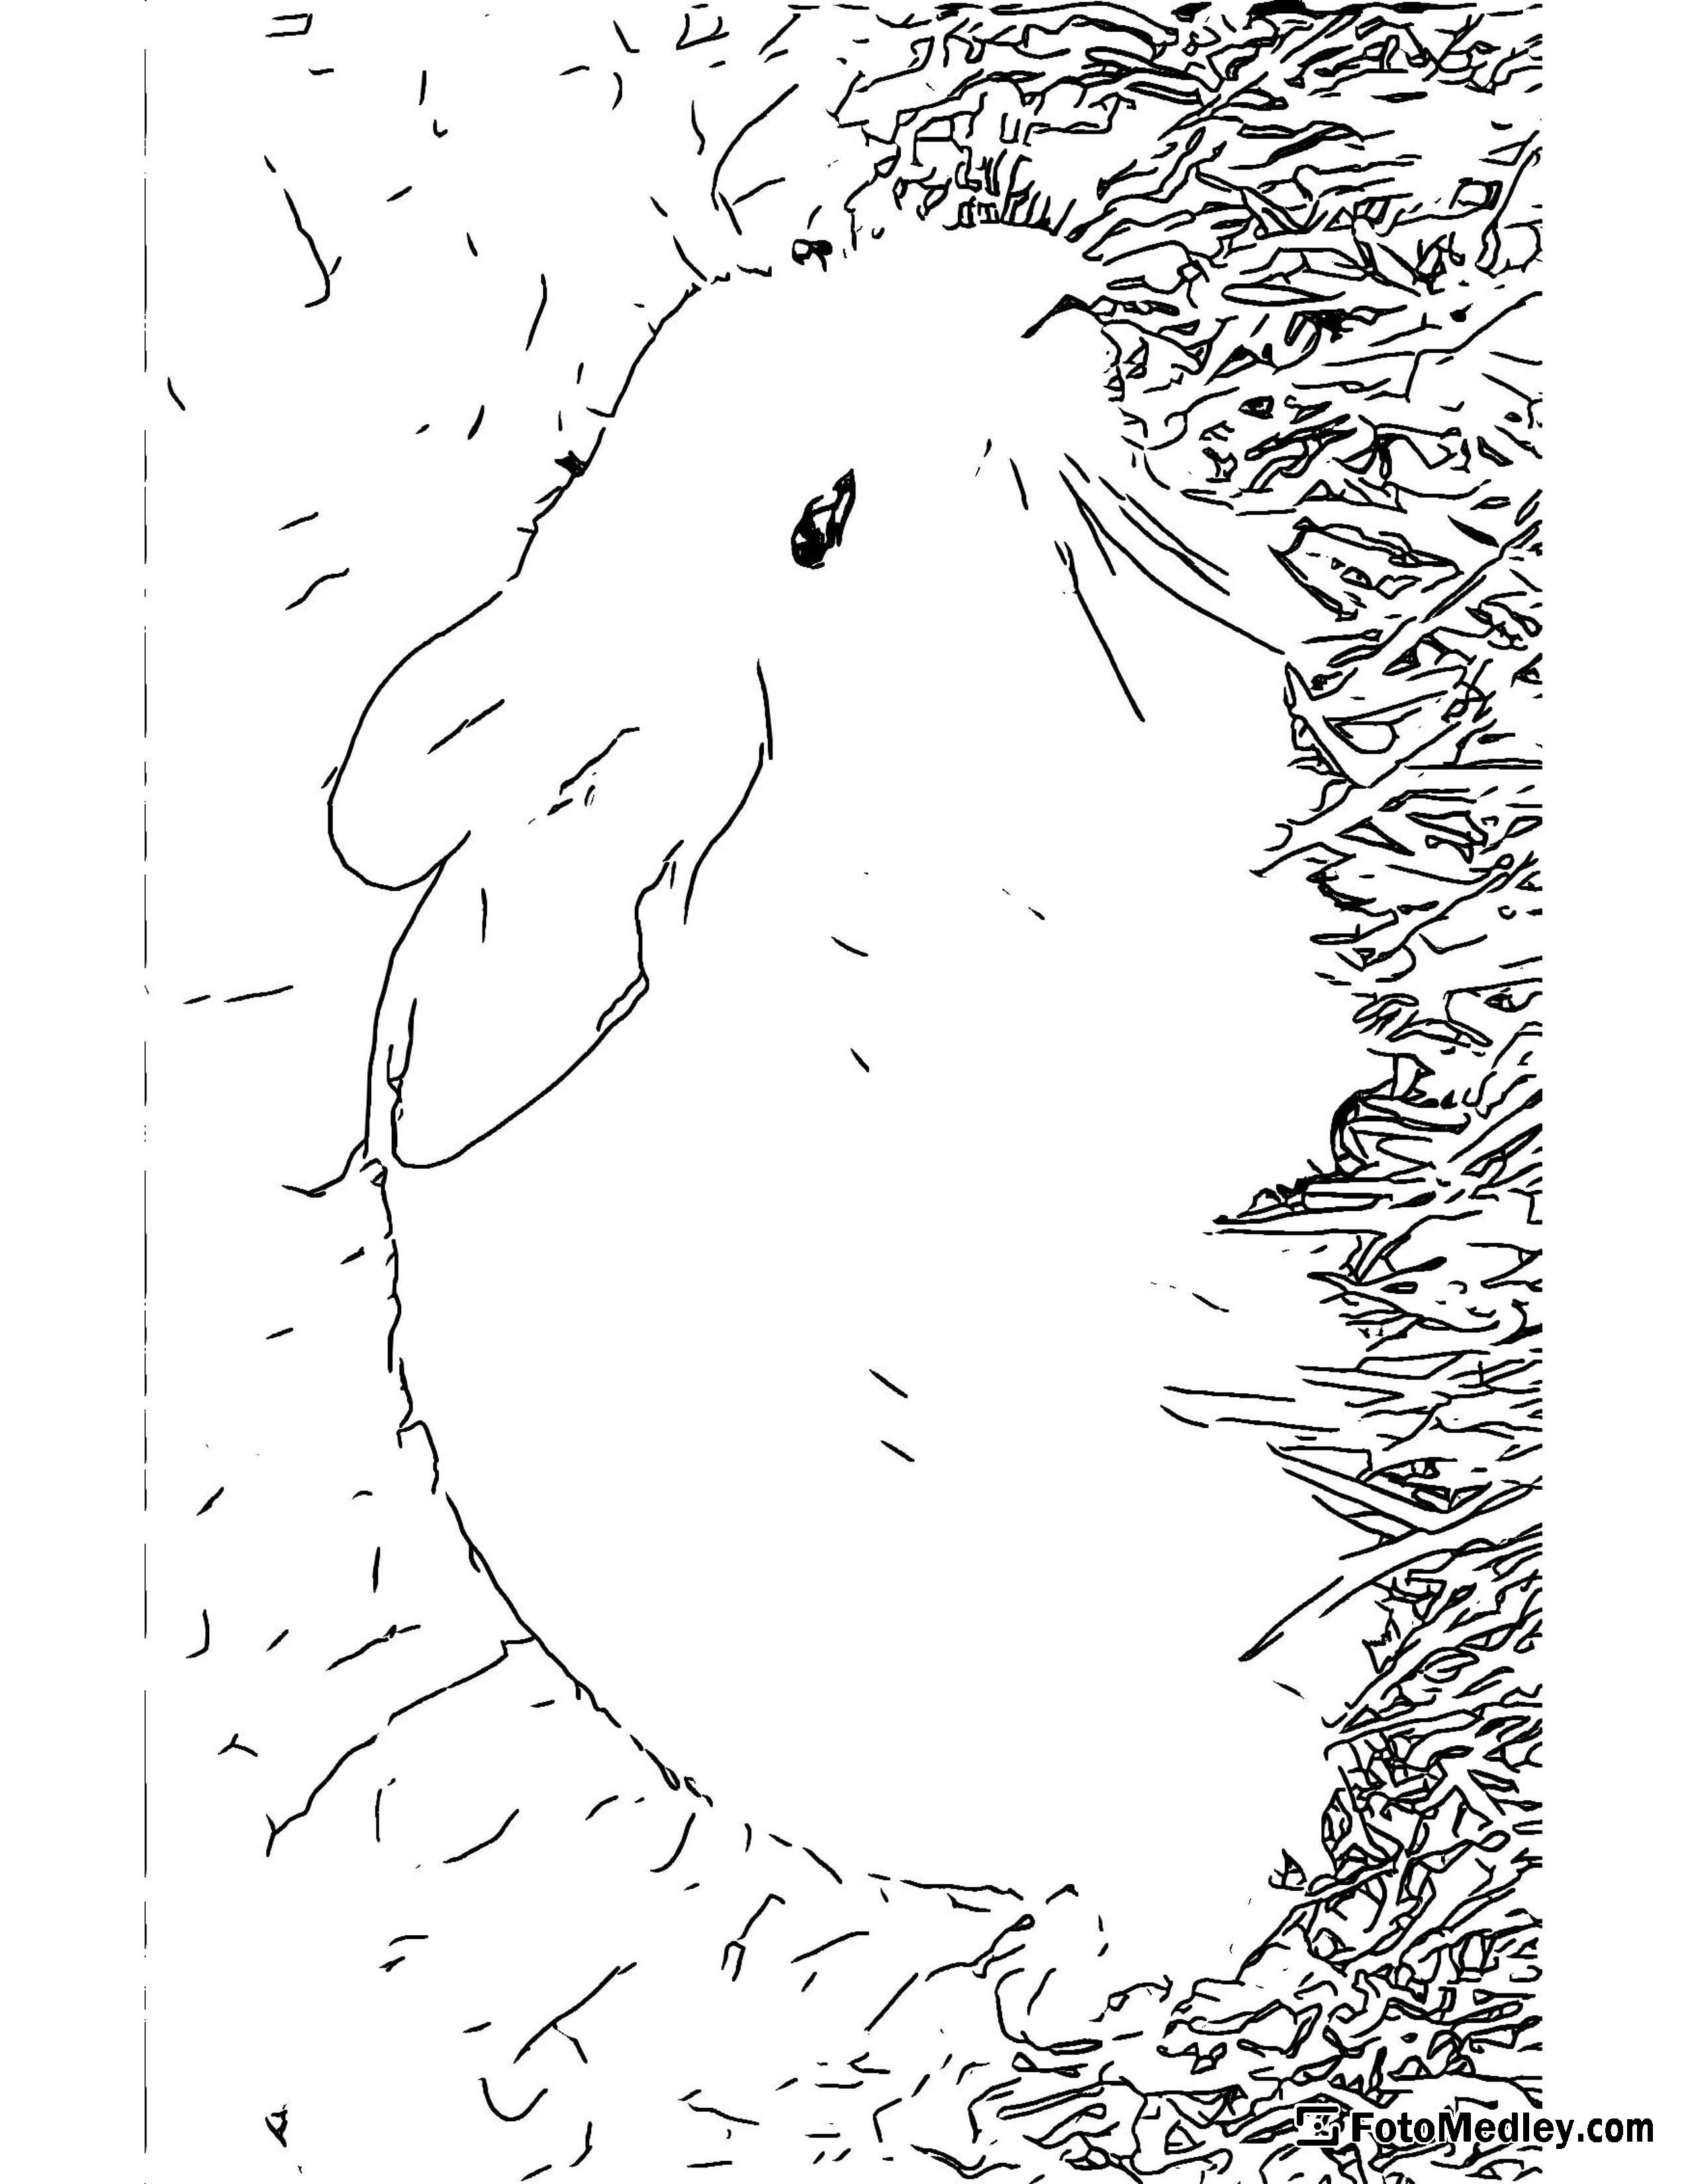 A coloring page of a white bunny rabbit in the grass.